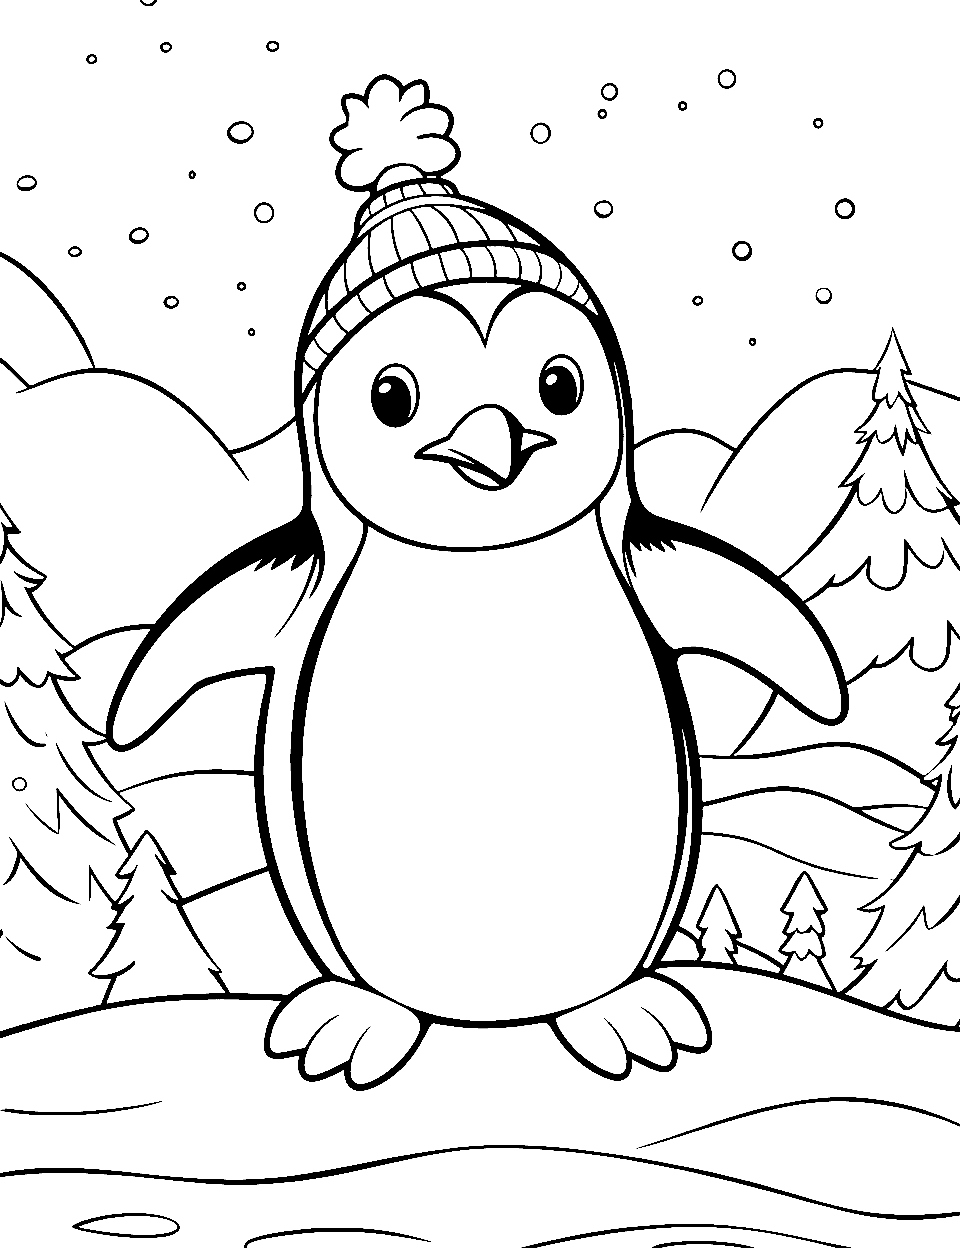 Winter Wonderland Coloring Page - A penguin amidst falling snowflakes, enjoying the winter chill.